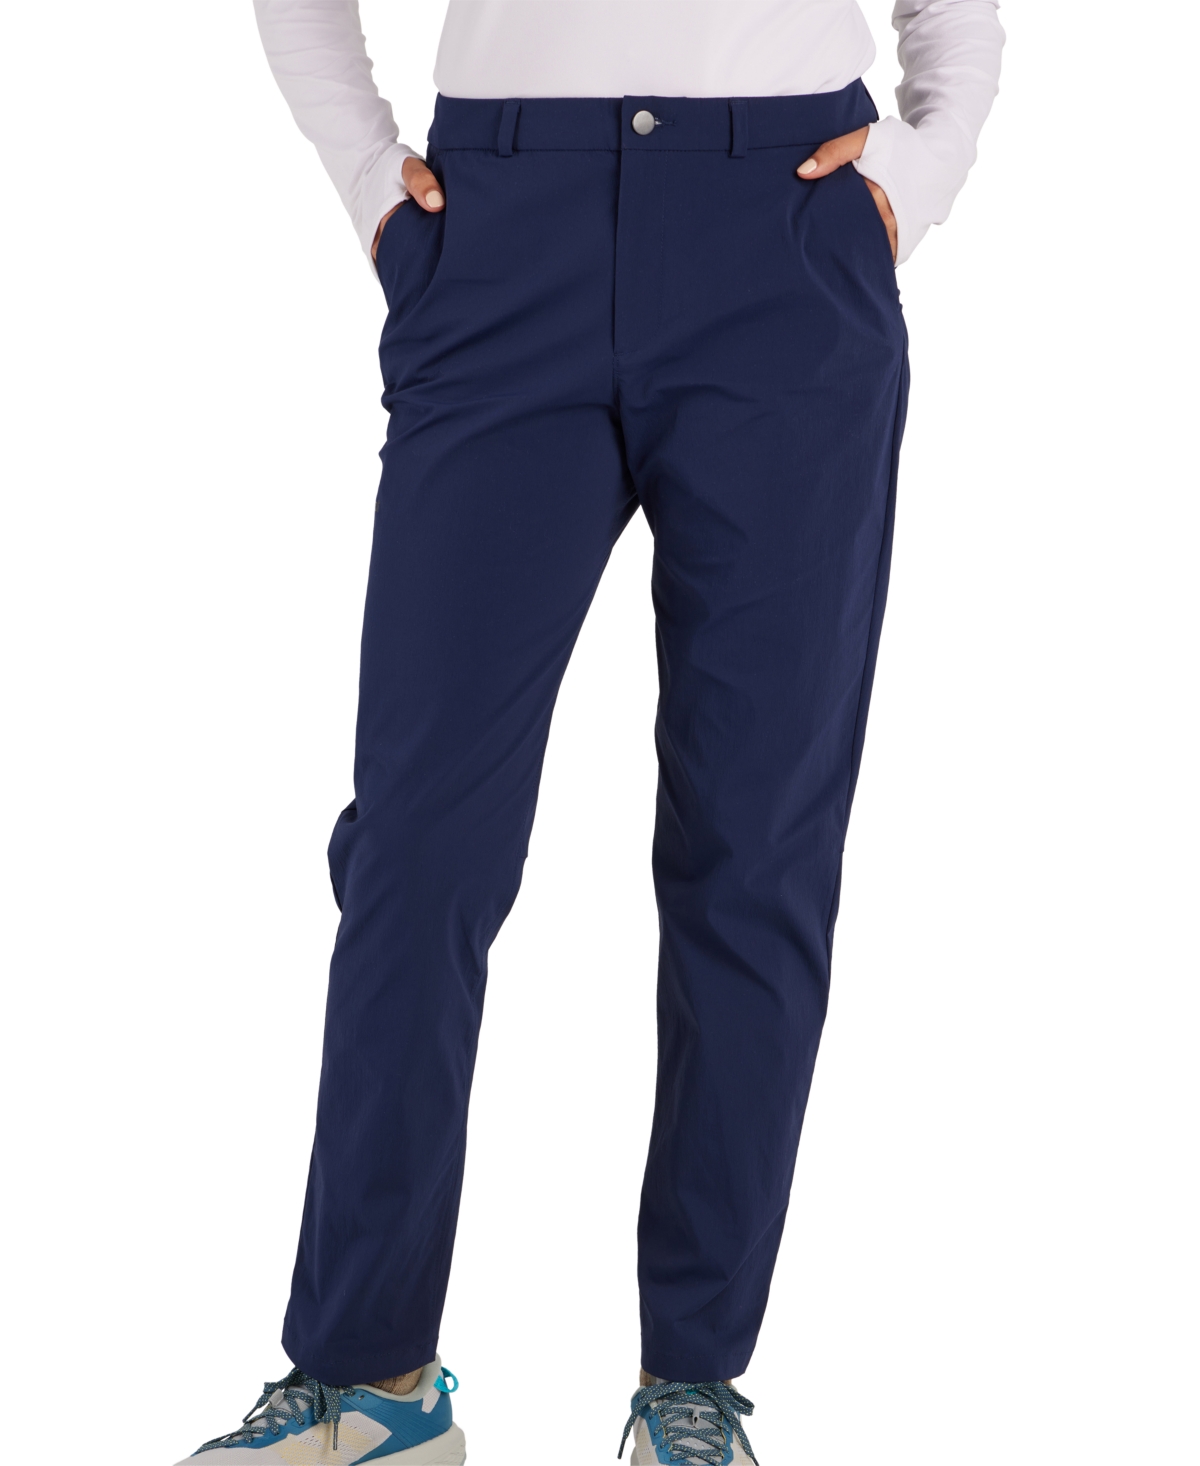 Women's Arch Rock Tapered Pants - Arctic Navy